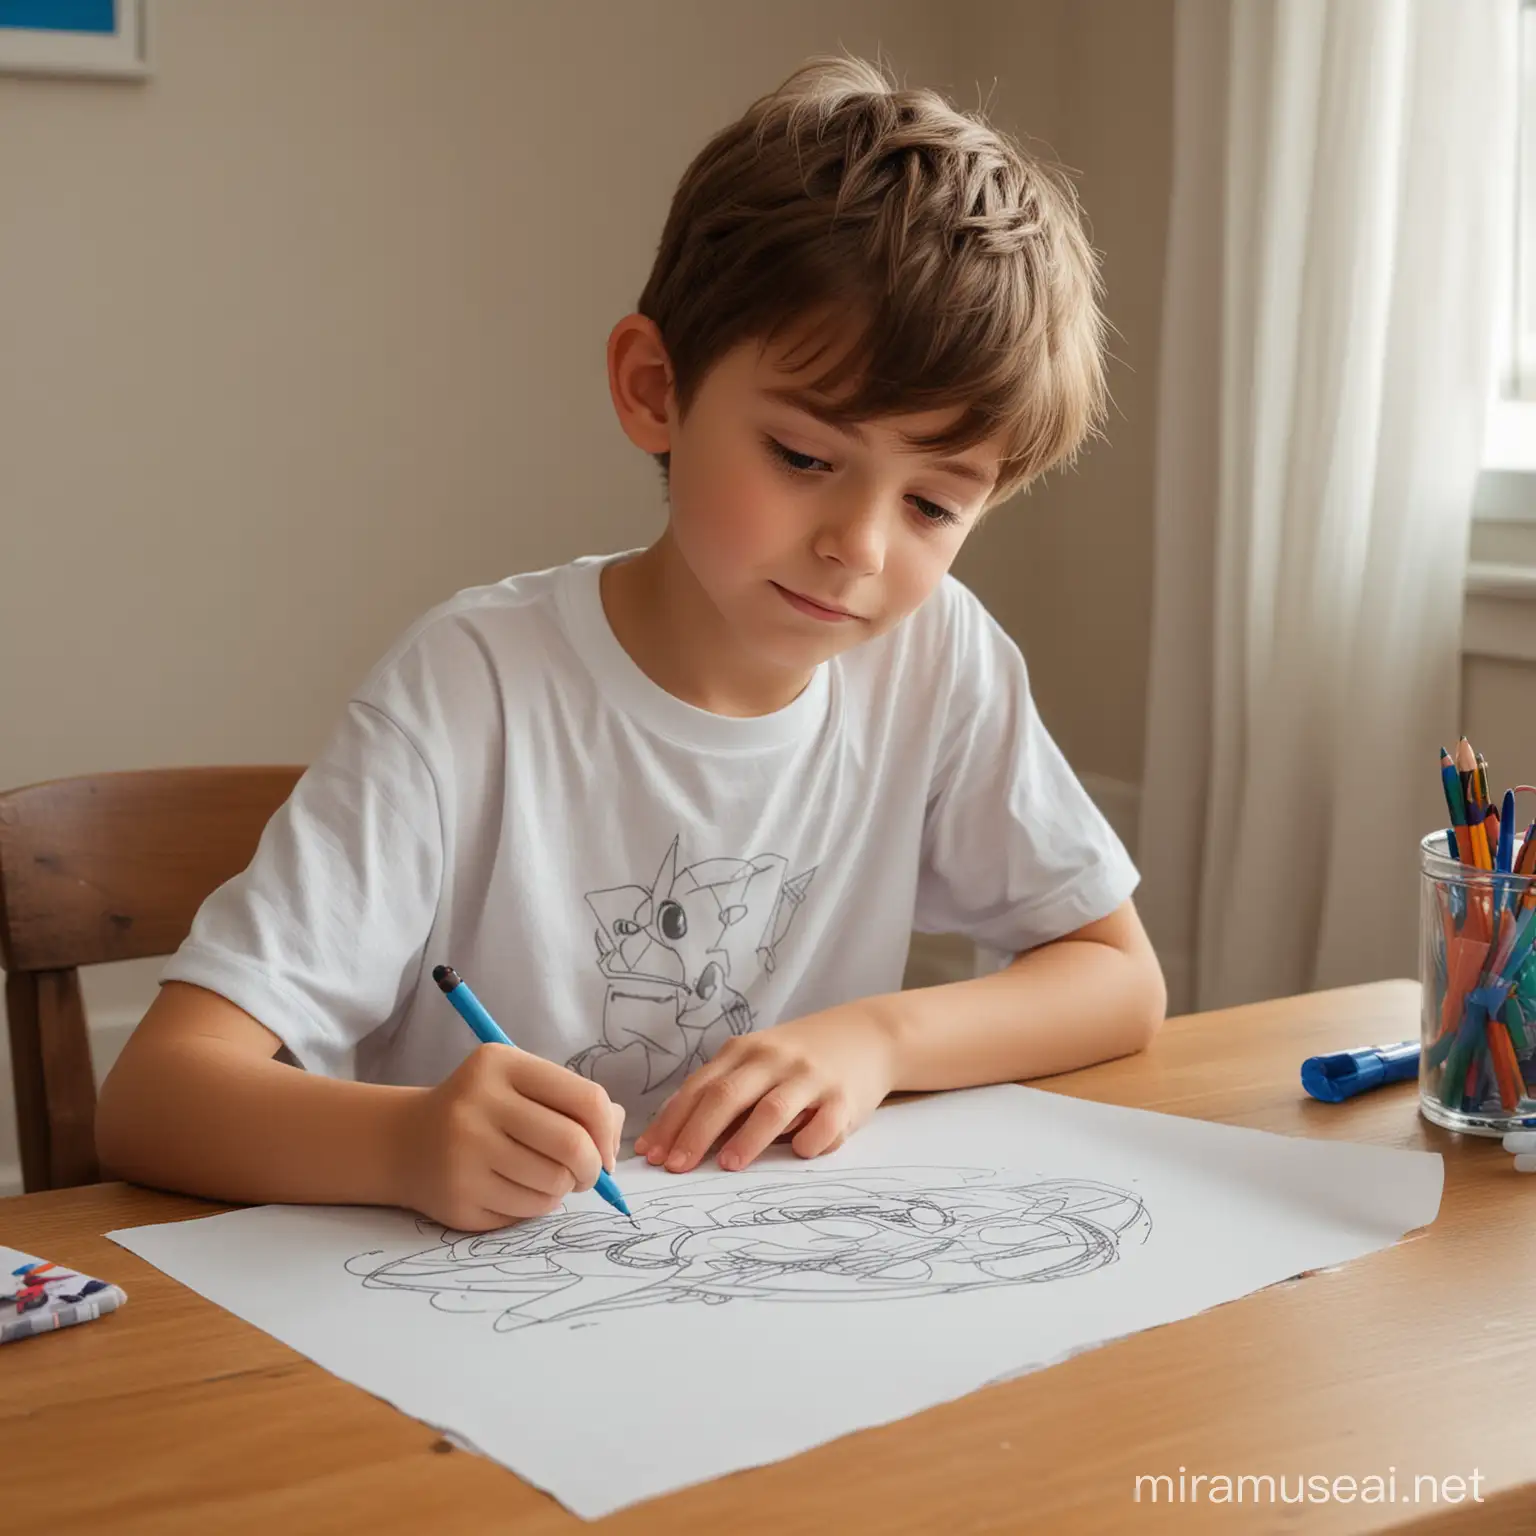 Boy Drawing on Paper in PixarStyle Childrens Room